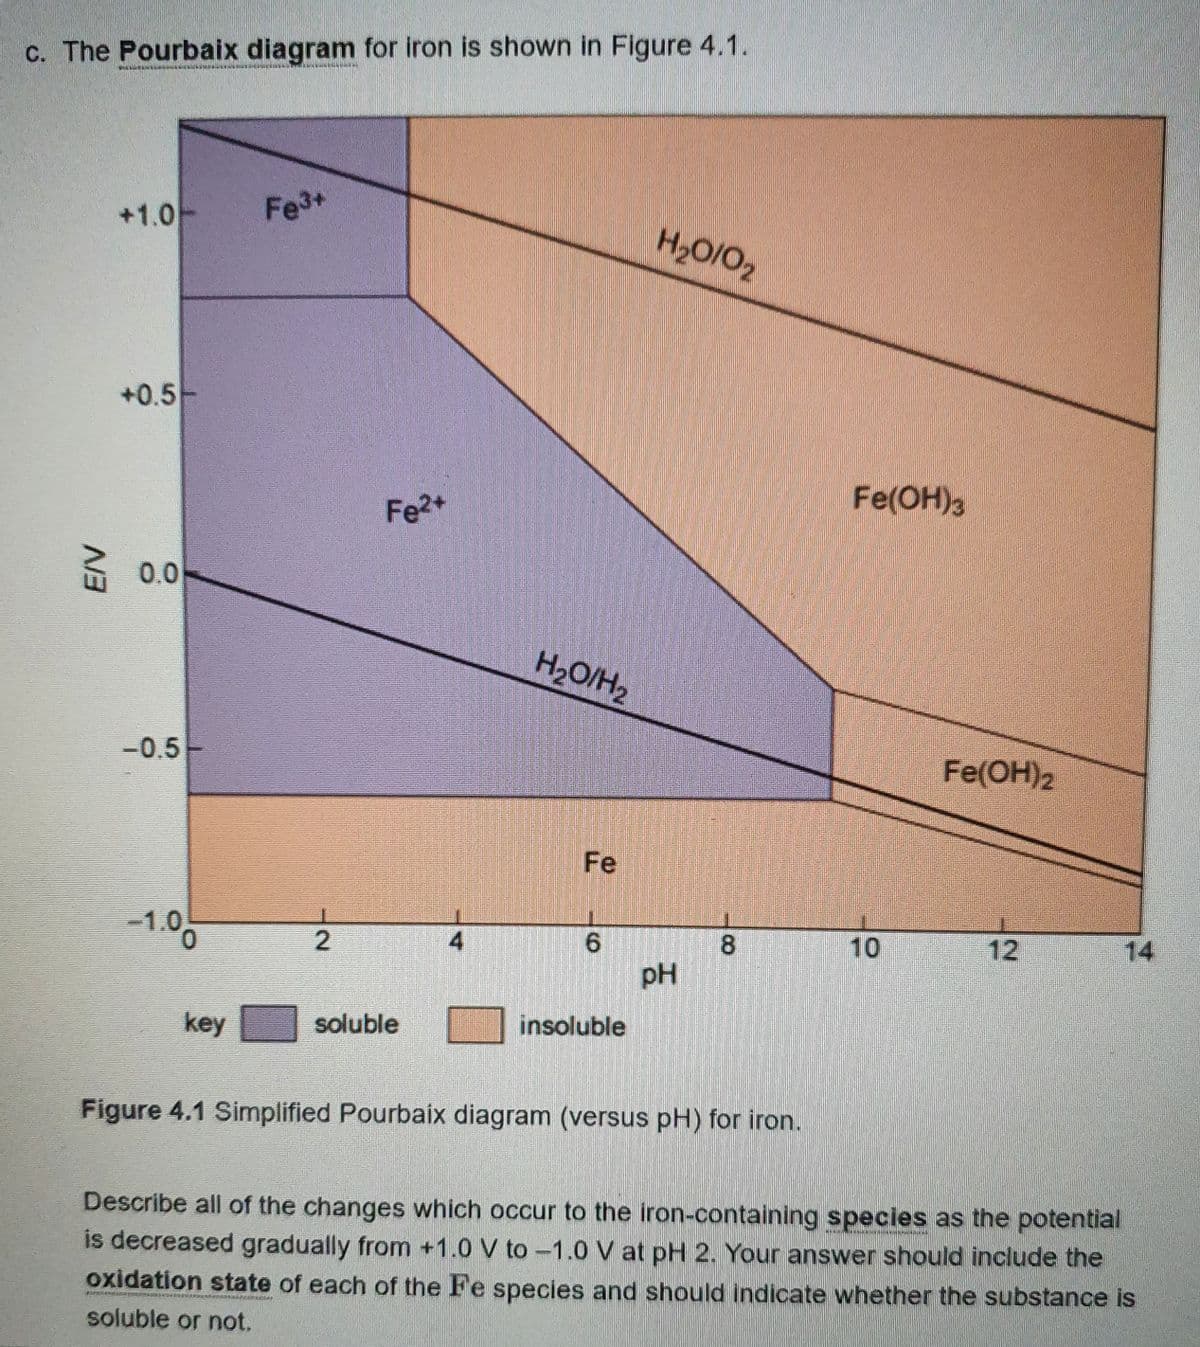 c. The Pourbaix diagram for iron is shown in Figure 4.1.
+1.0
+0.5
2 0.0
3
-0.5
-1.0
key
Fe³+
2
soluble or not.
Fe2+
soluble
4
H₂O/H₂
Fe
6
insoluble
H₂O/O2
pH
00
8
Figure 4.1 Simplified Pourbaix diagram (versus pH) for iron.
Fe(OH)3
10
Fe(OH)2
12
V
Describe all of the changes which occur to the iron-containing species as the potential
is decreased gradually from +1.0V to -1.0 V at pH 2. Your answer should include the
oxidation state of each of the Fe species and should indicate whether the substance is
NERFAREN